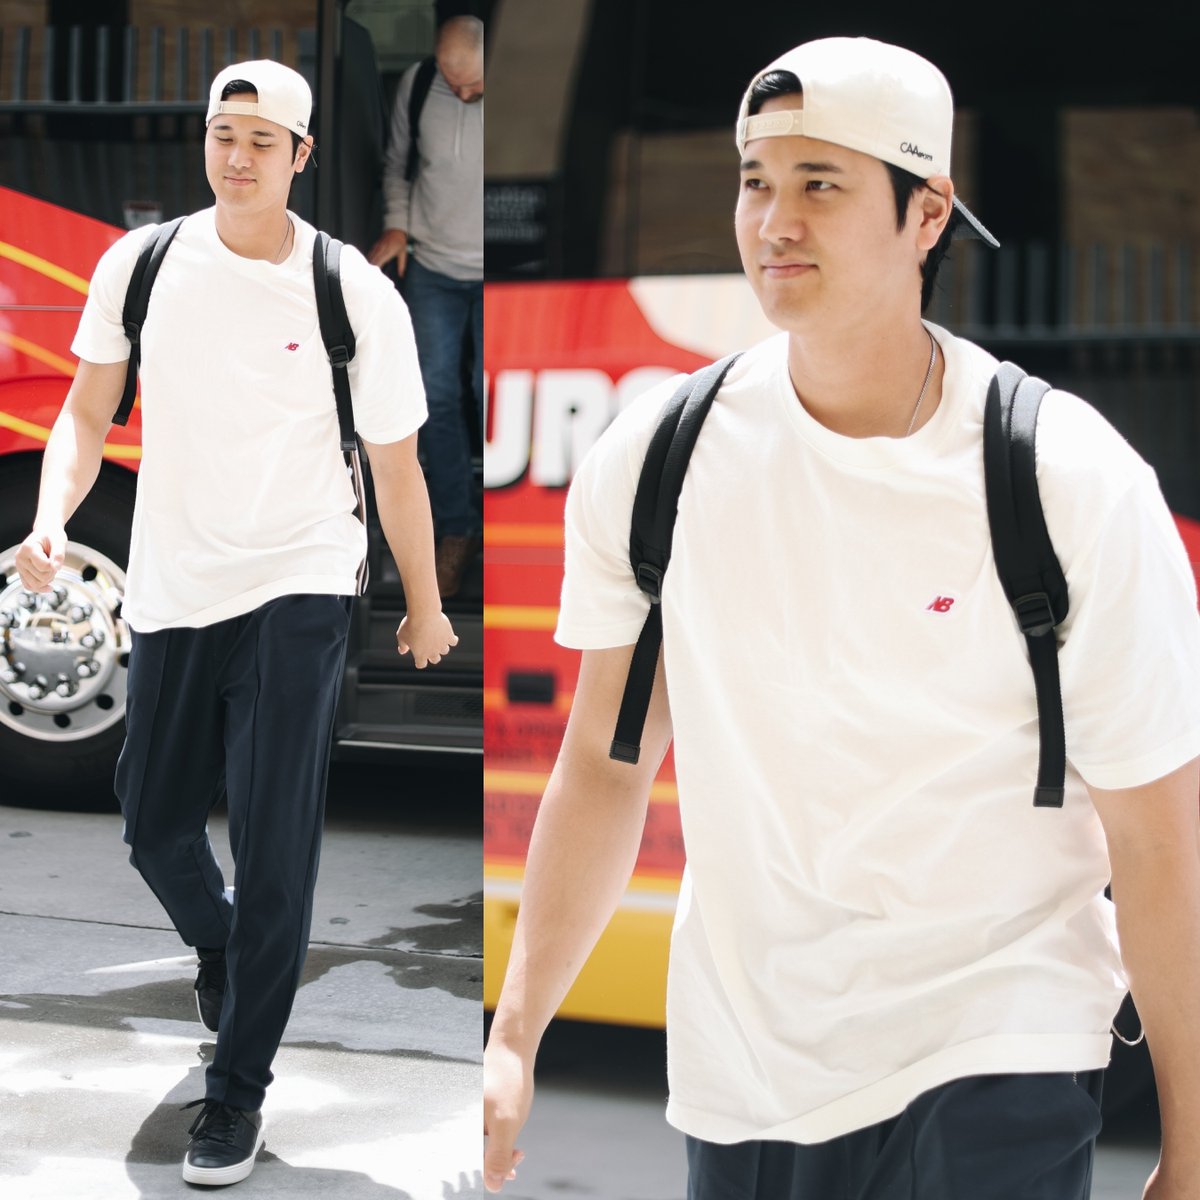 Shohei Ohtani arriving in San Diego for the Dodgers-Padres game tonight 👀